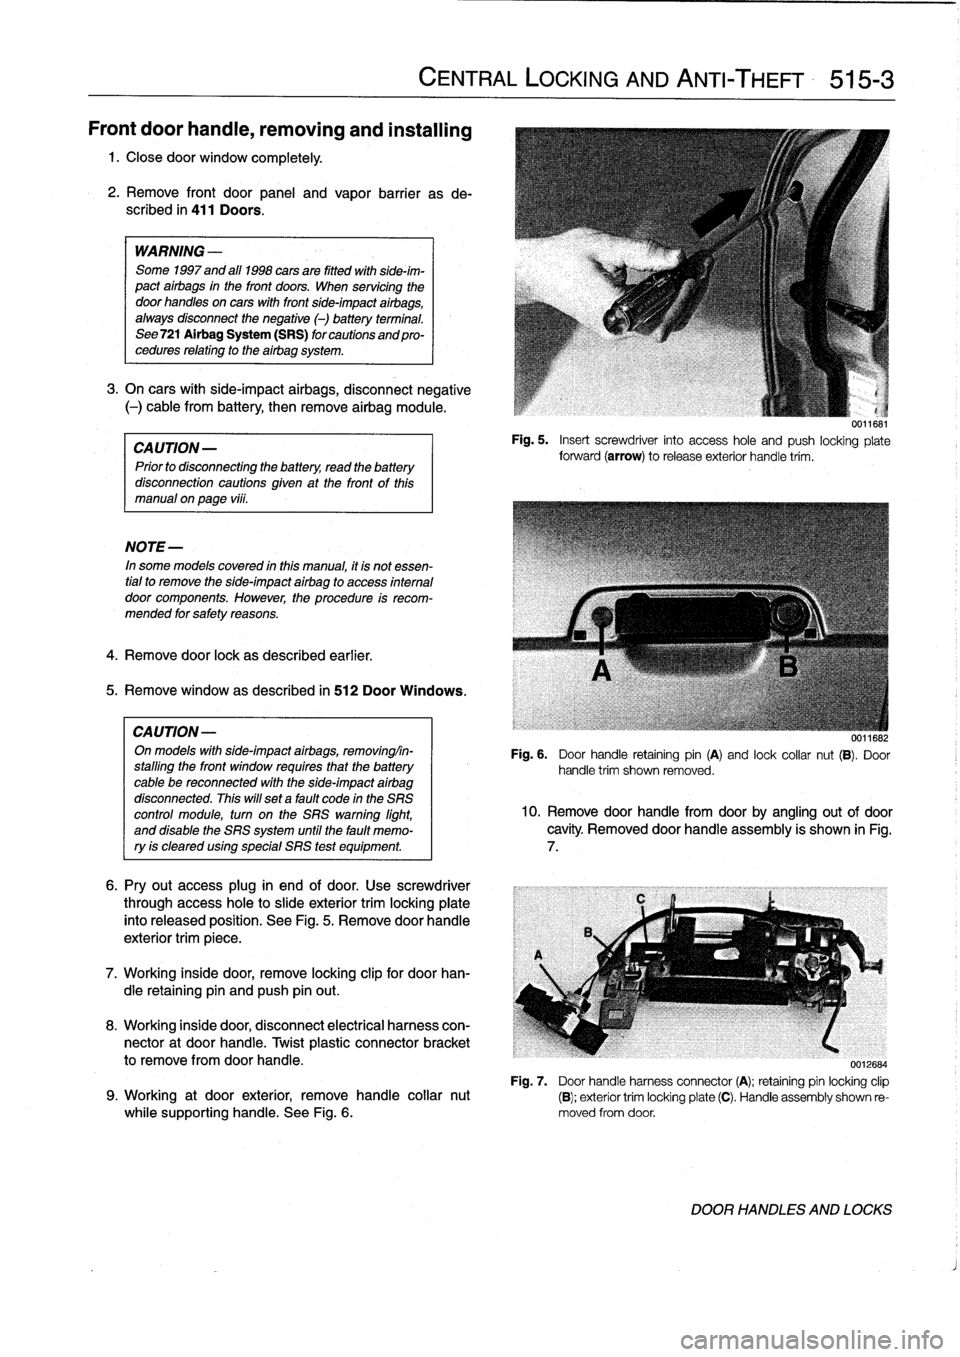 BMW M3 1998 E36 Owners Manual 
Front
door
handle,
removing
and
installing

1
.
Closedoor
window
completely
.

2
.
Remove
front
door
panel
and
vapor
barrier
asde-
scribed
in
411
Doors
.

WARNING
-

Some
1997
and
al]
1998
cars
are
f